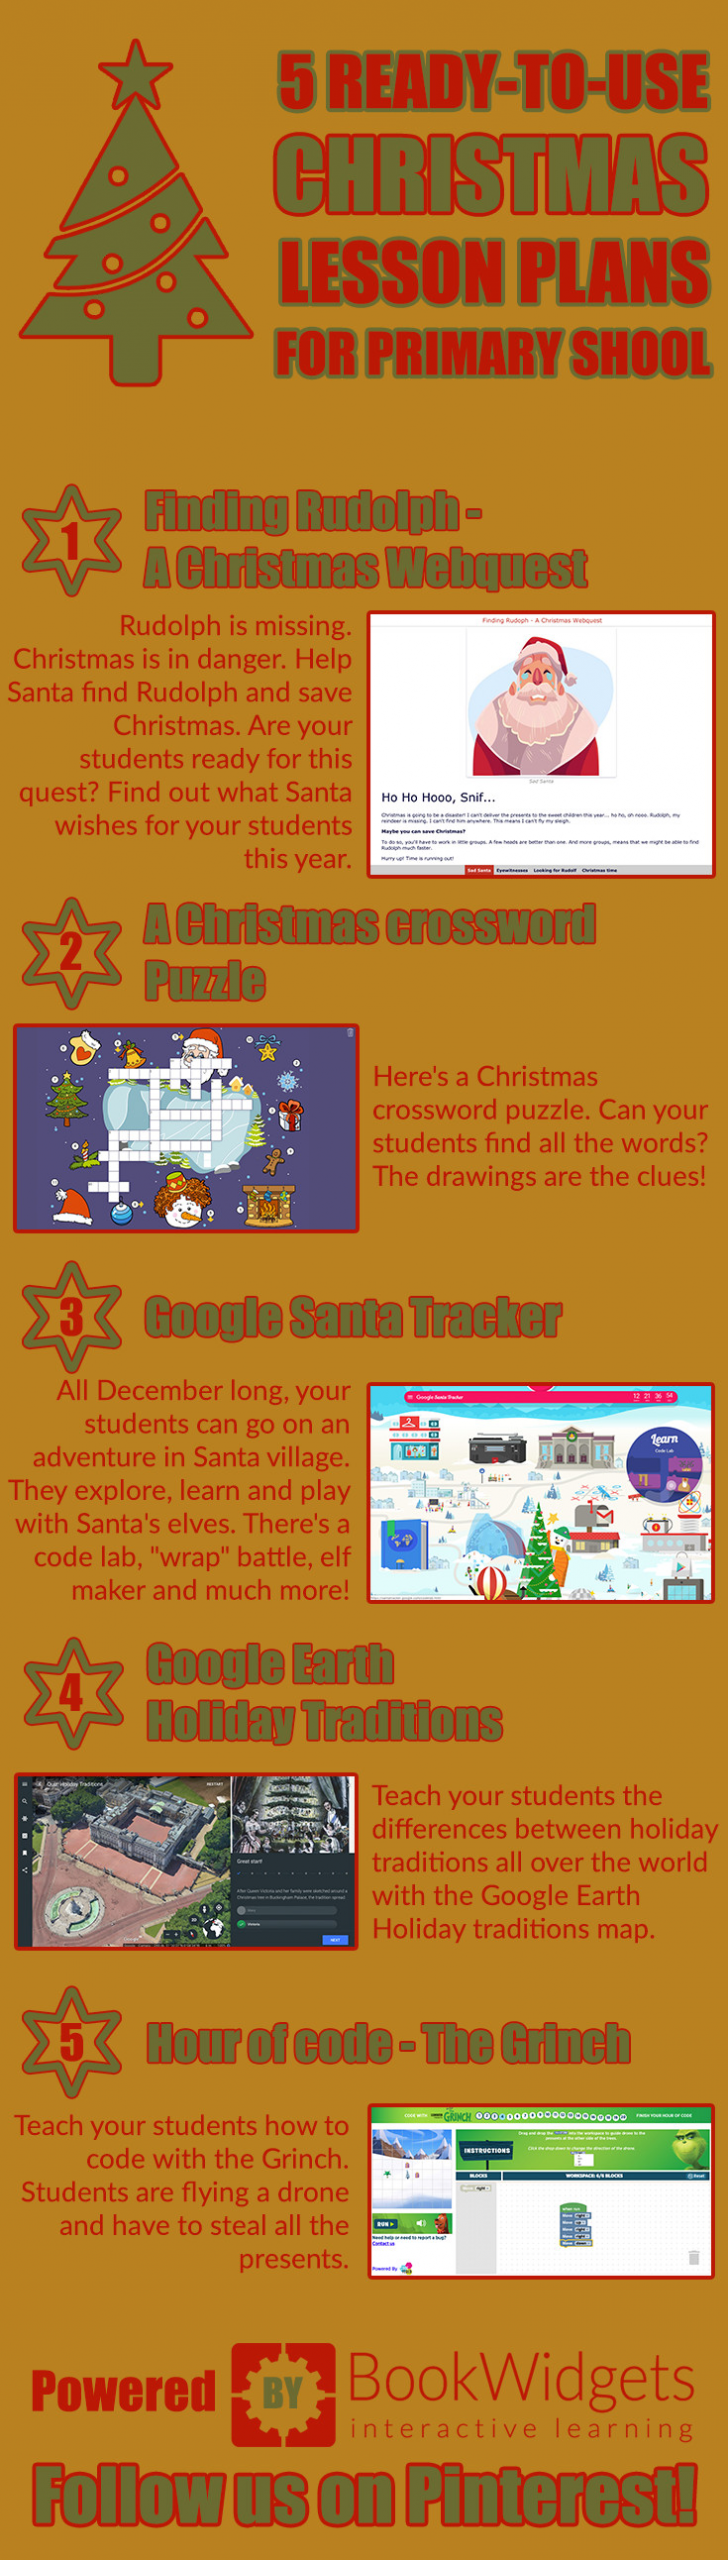 Christmas Lesson Plans 5 Amazing Christmas Lesson Plans for Primary School